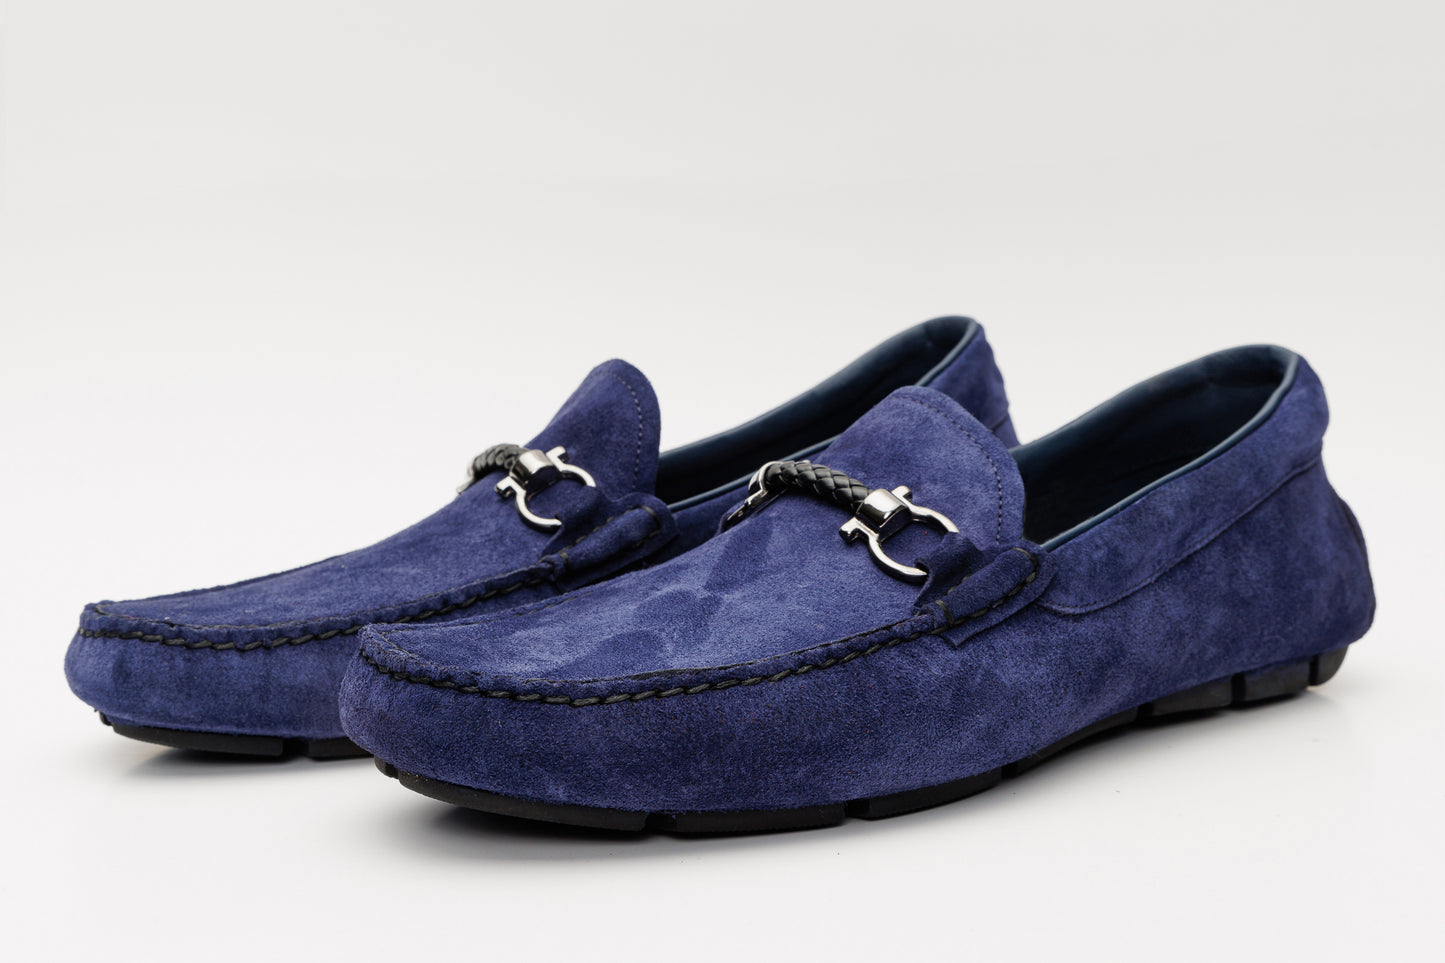 The Bari Navy Blue Suede Leather Bit Drive Loafer Men Shoe